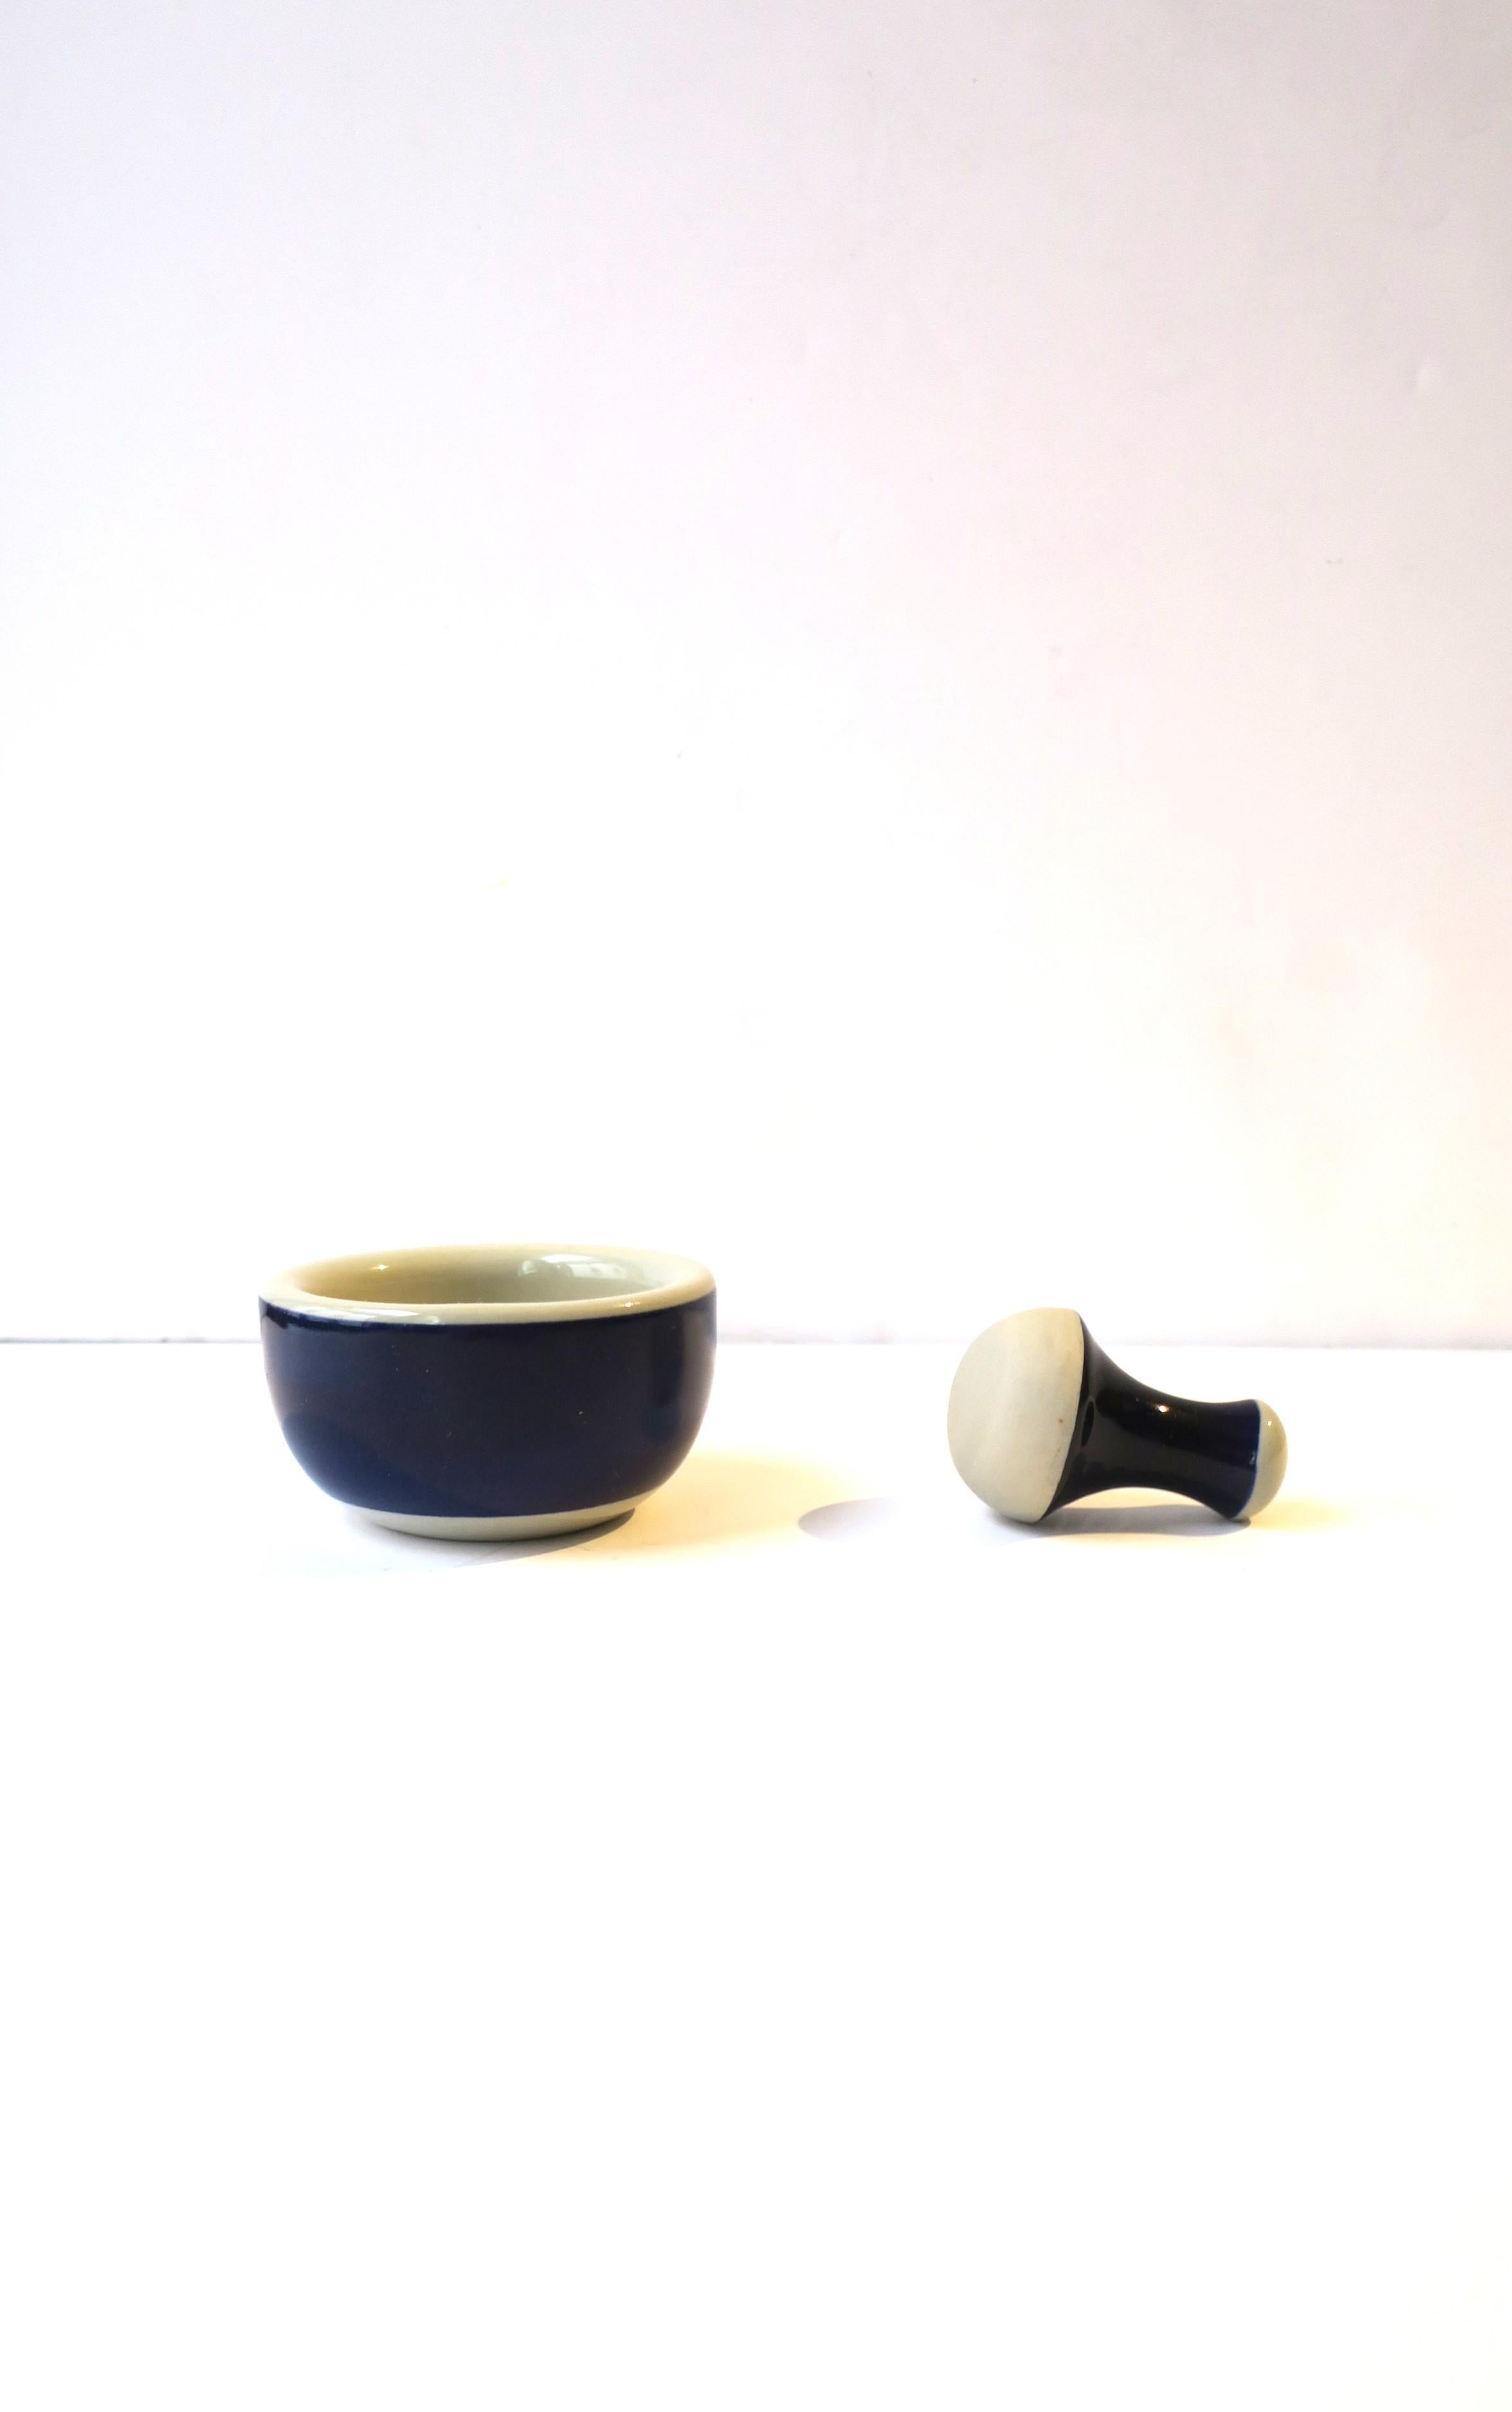 A Swedish blue and stone-white porcelain mortar and pestle set, in the Scandinavian Modern style, by Rörstrand, circa late-20th century, Sweden. Piece is stone-white and sapphire blue hues. Piece is hand-painted and made in Sweden as marked. Pestle